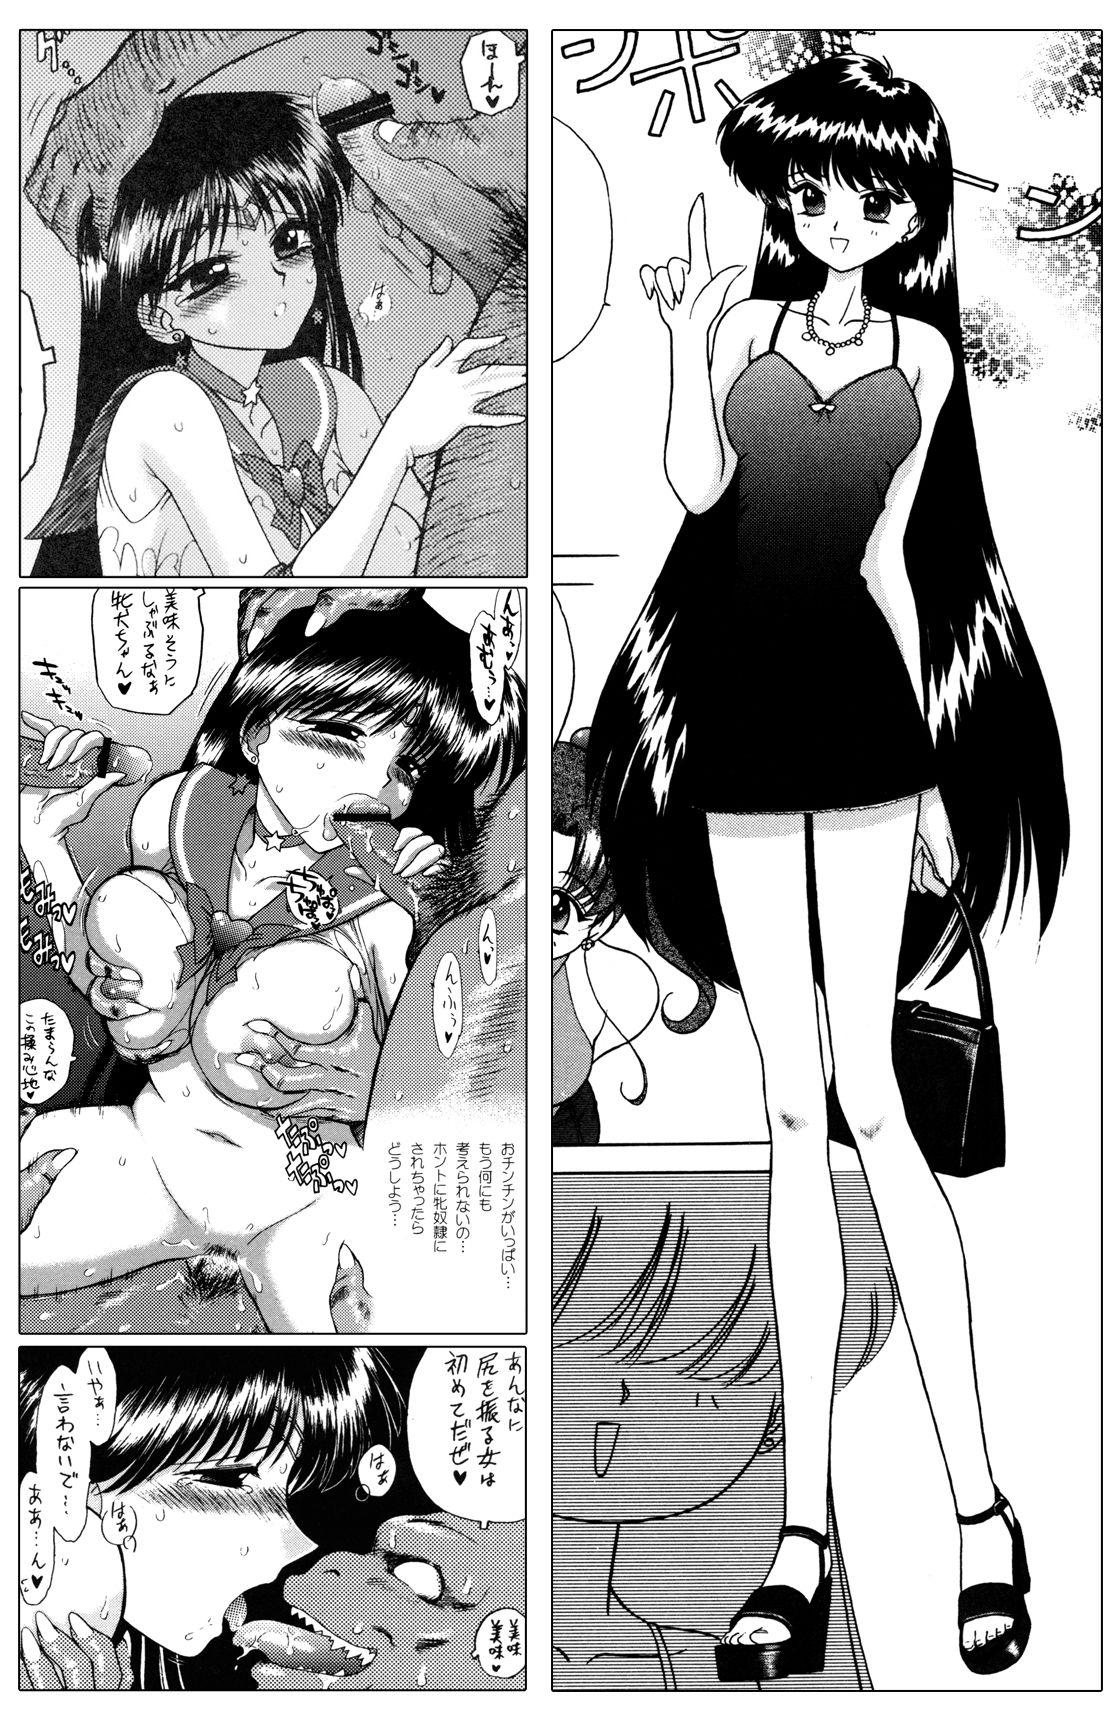 Nice Tits QUEEN OF SPADES - 黑桃皇后 - Sailor moon Pierced - Page 12